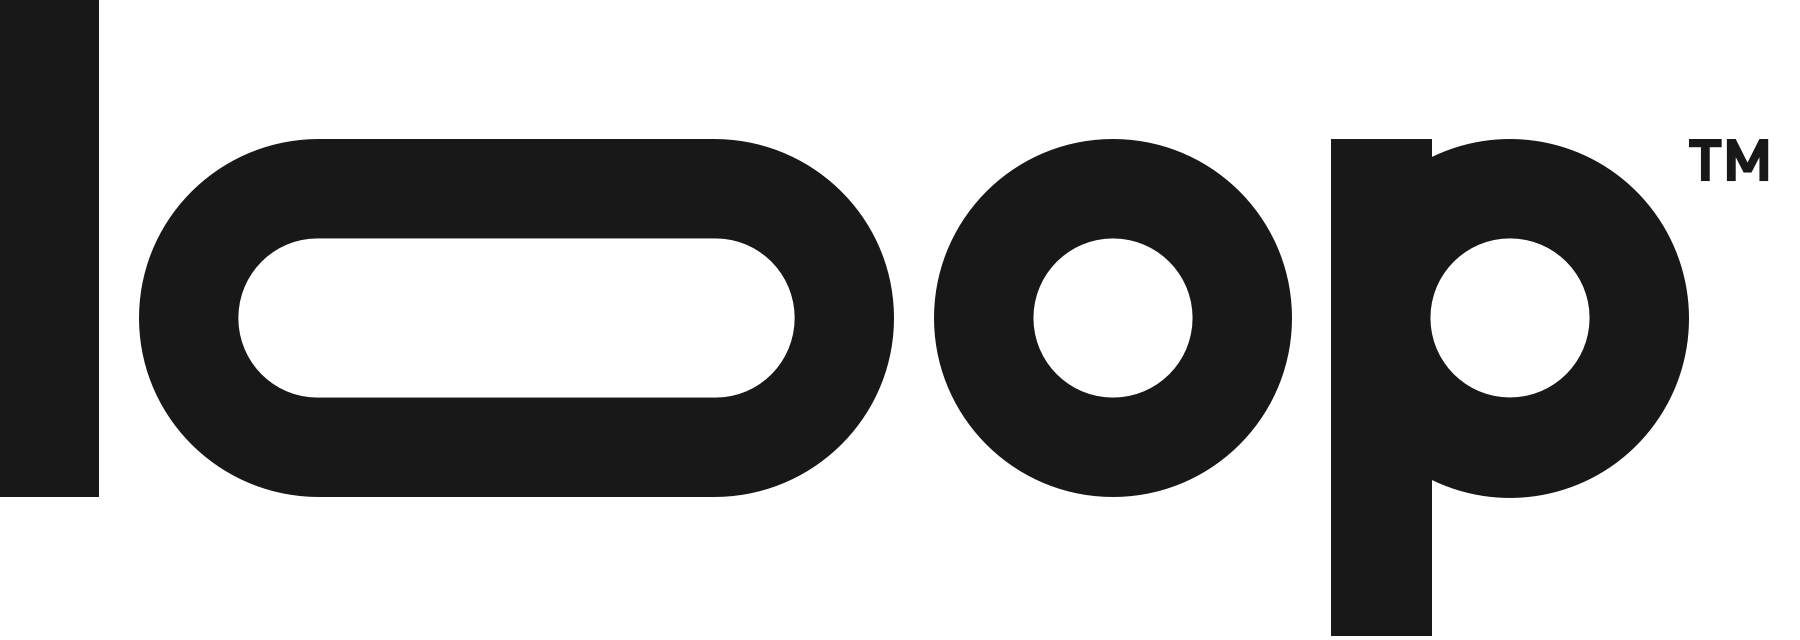 Loop Media Strengthens Products And Services Offerings Through Strategic Alliance With Pypestream ($LPTV)